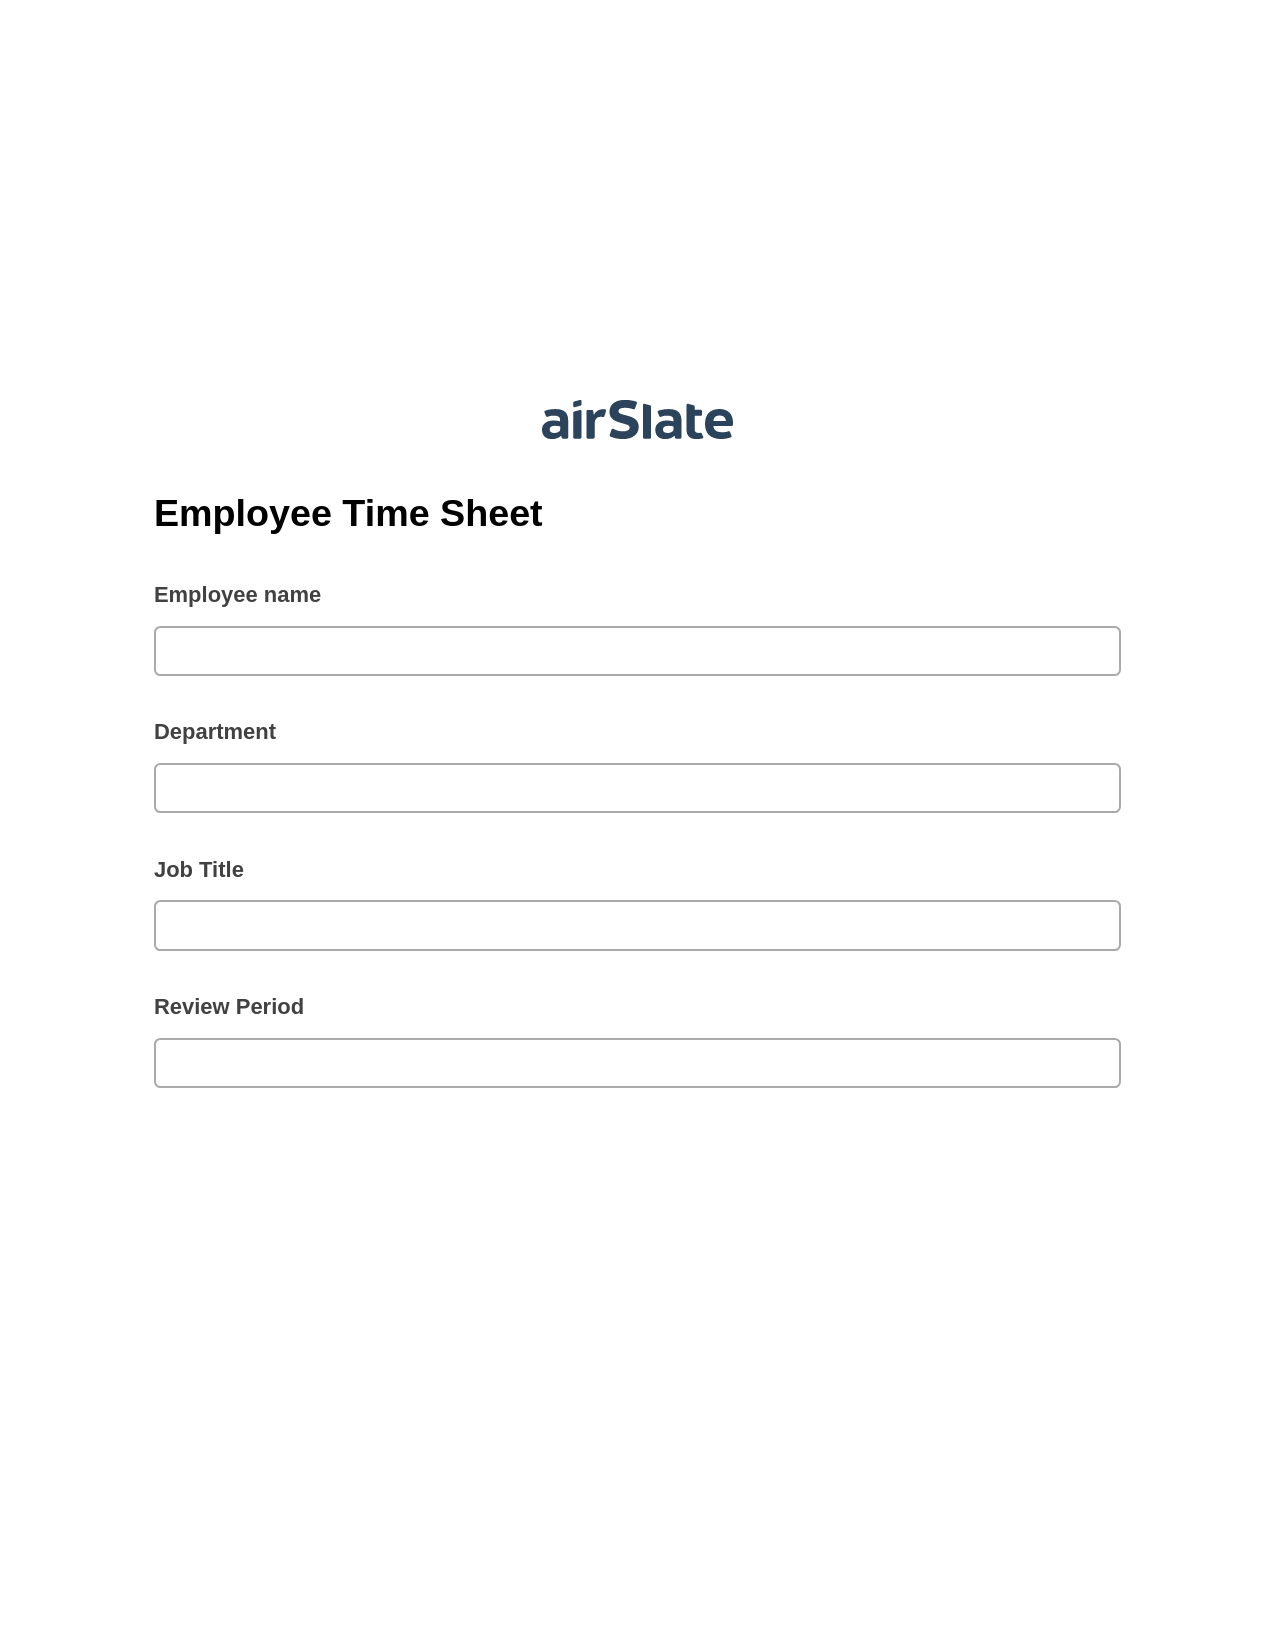 Employee Time Sheet Pre-fill from MS Dynamics 365 Records, Create Salesforce Records Bot, Archive to SharePoint Folder Bot